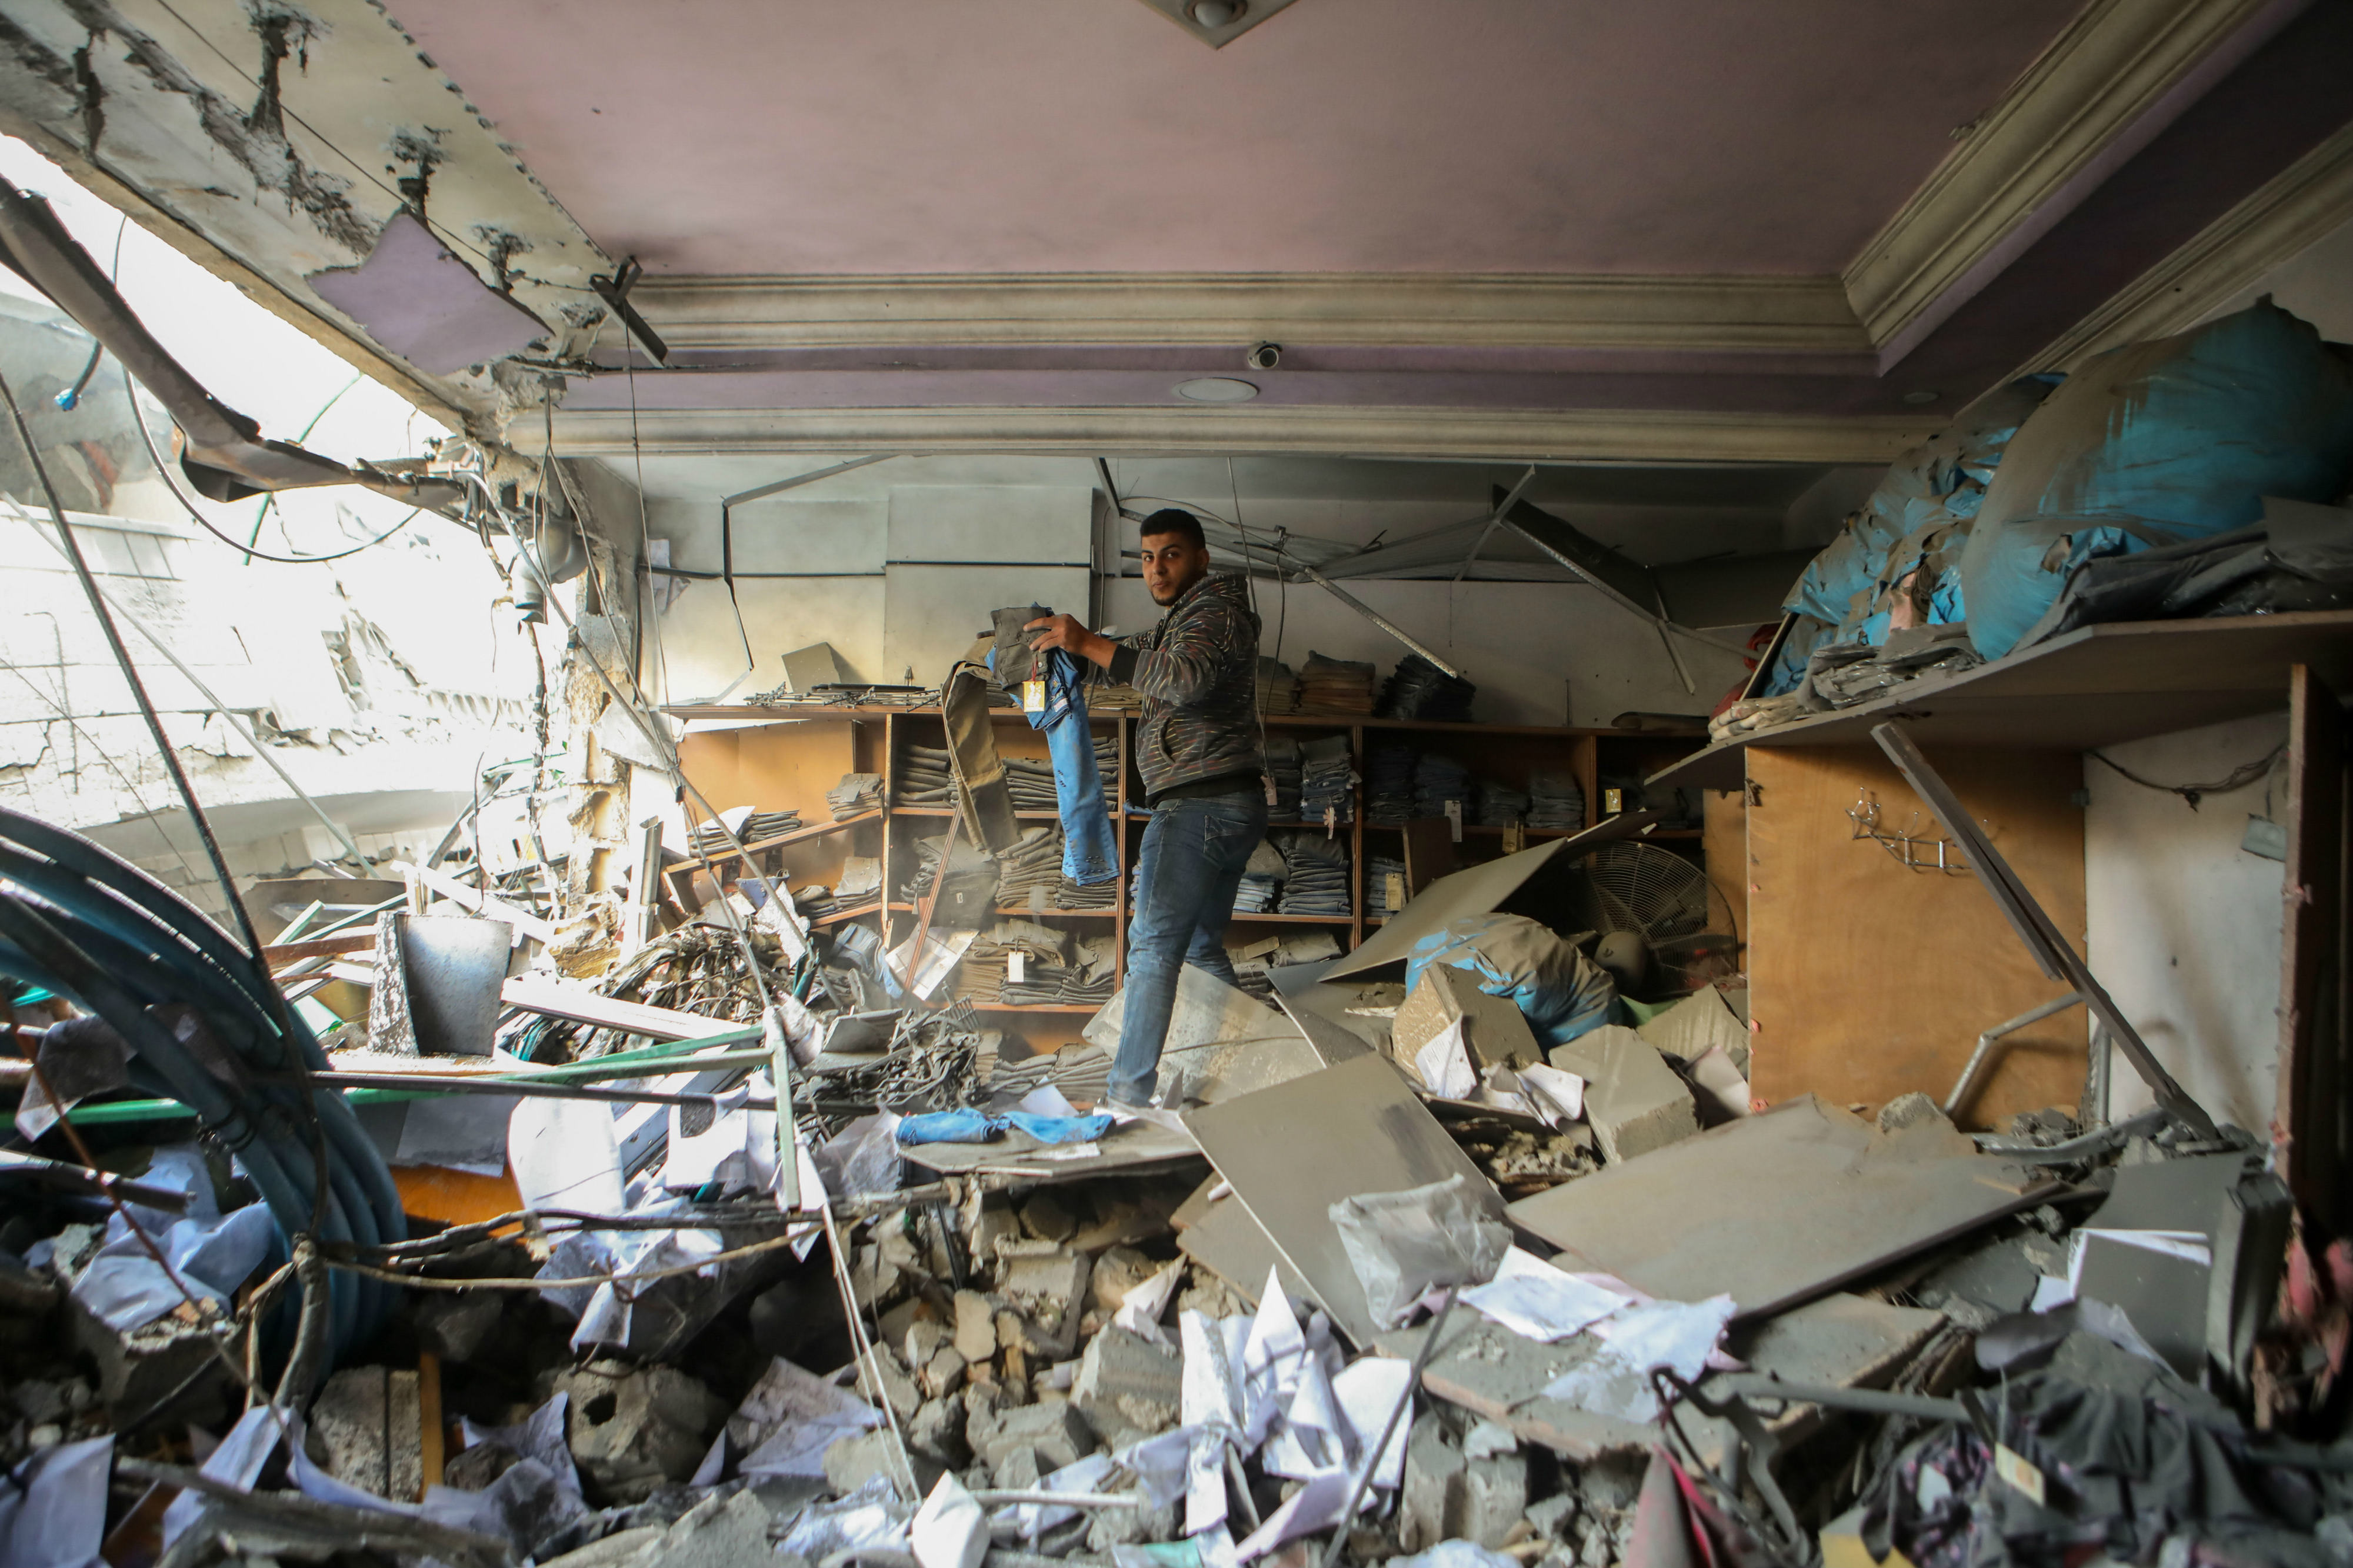 A Palestinian man in his home wrecked after Israeli strikes the day before (MEE/Mohammed al-Hajjar)